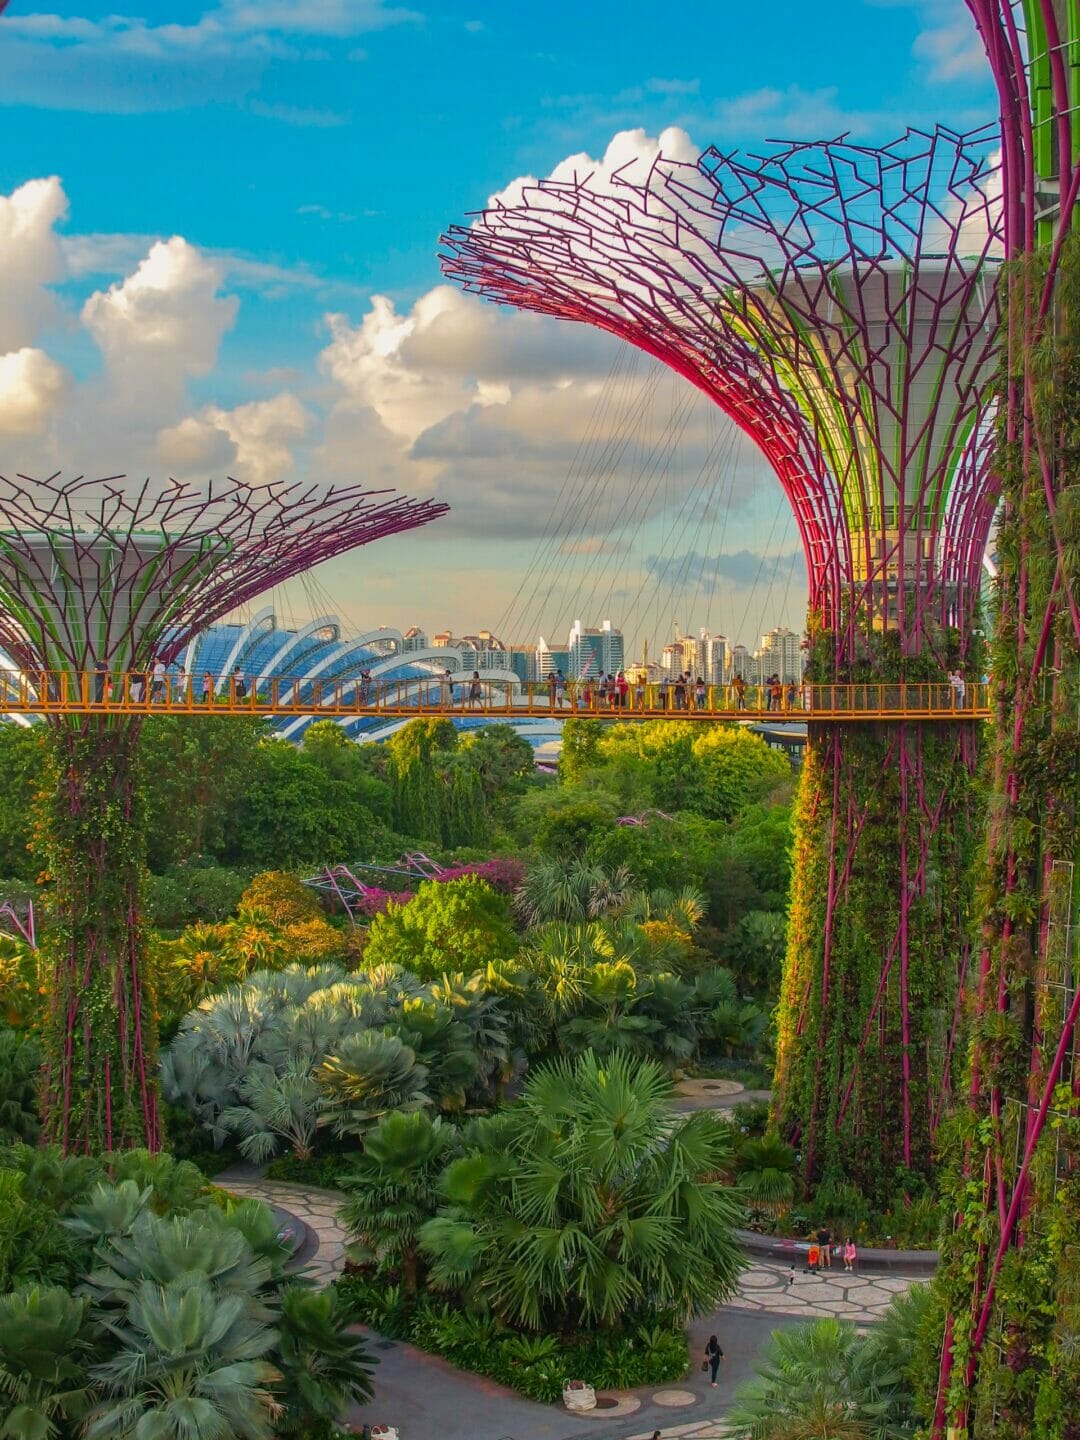 A futuristic garden with psychedelic tree-like structures